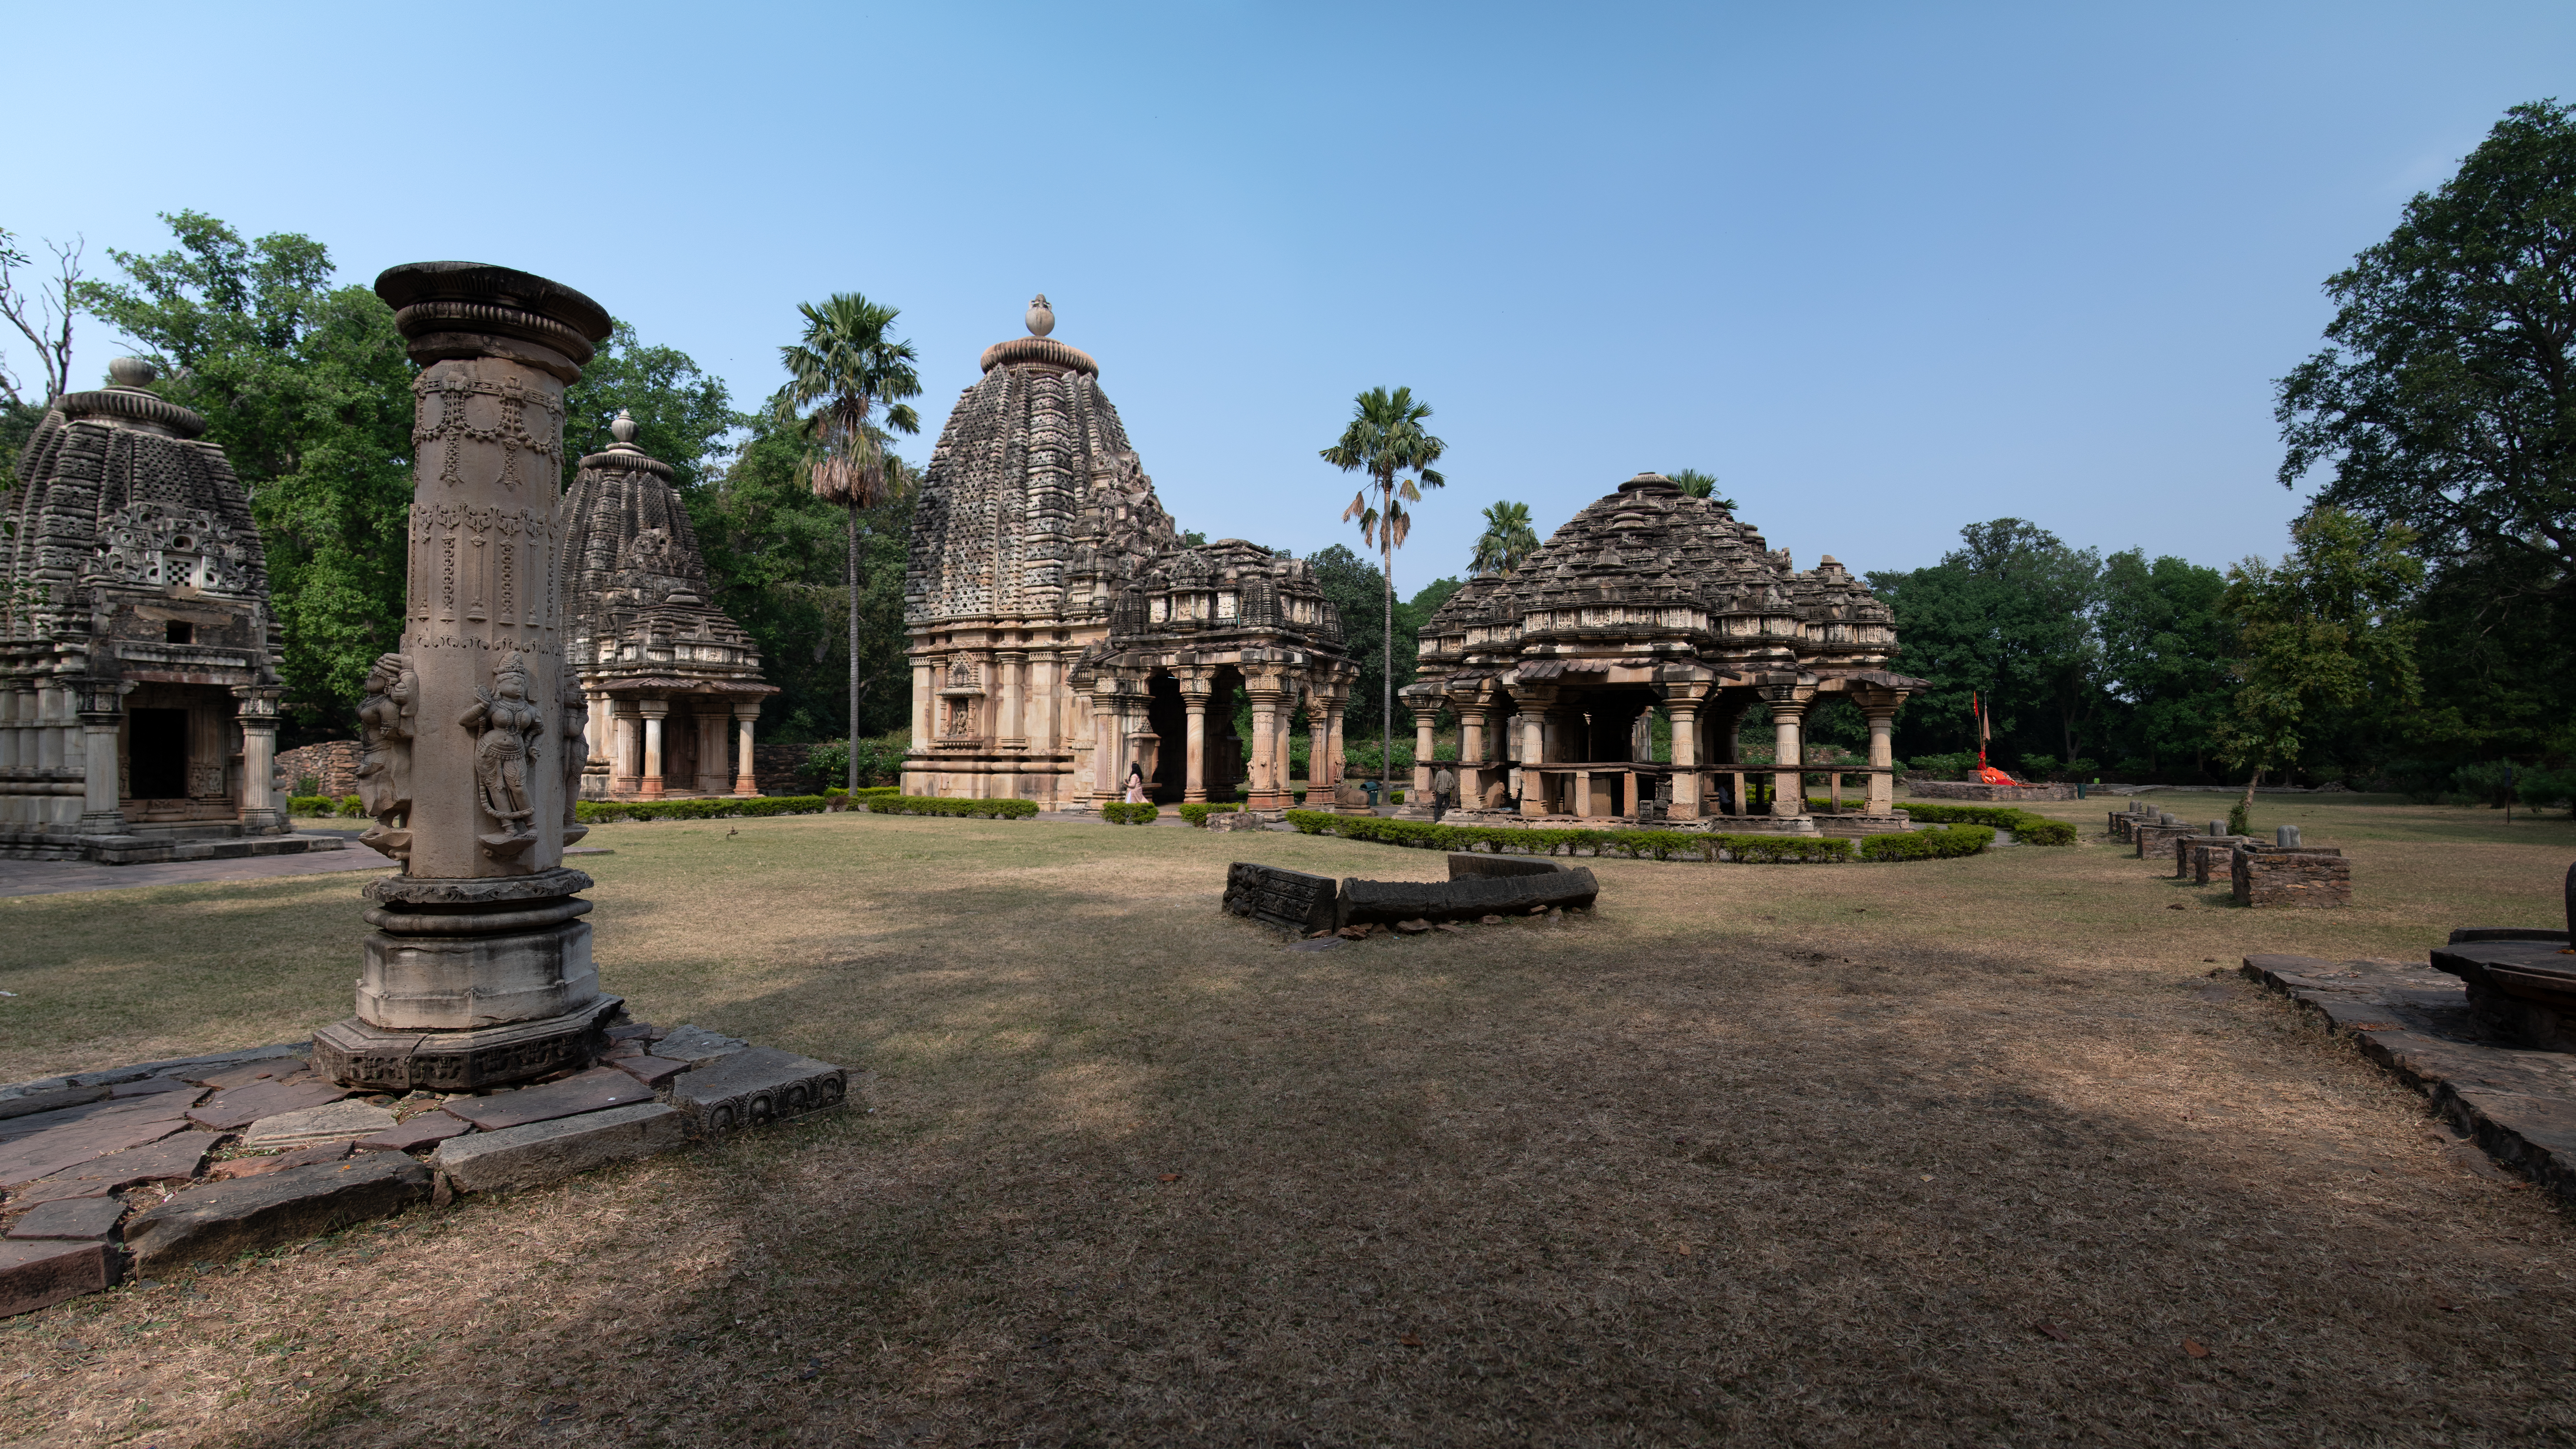 The second cluster in the Baroli group of temples includes Ghateshwar Temple, Mahishasuramardini Temple, Vamana Temple and Sadashiva Temple. There is also a detached big doorframe, a kund (tank), a small modern shrine and a series of Shiva lingas (arranged in raw) in this cluster.